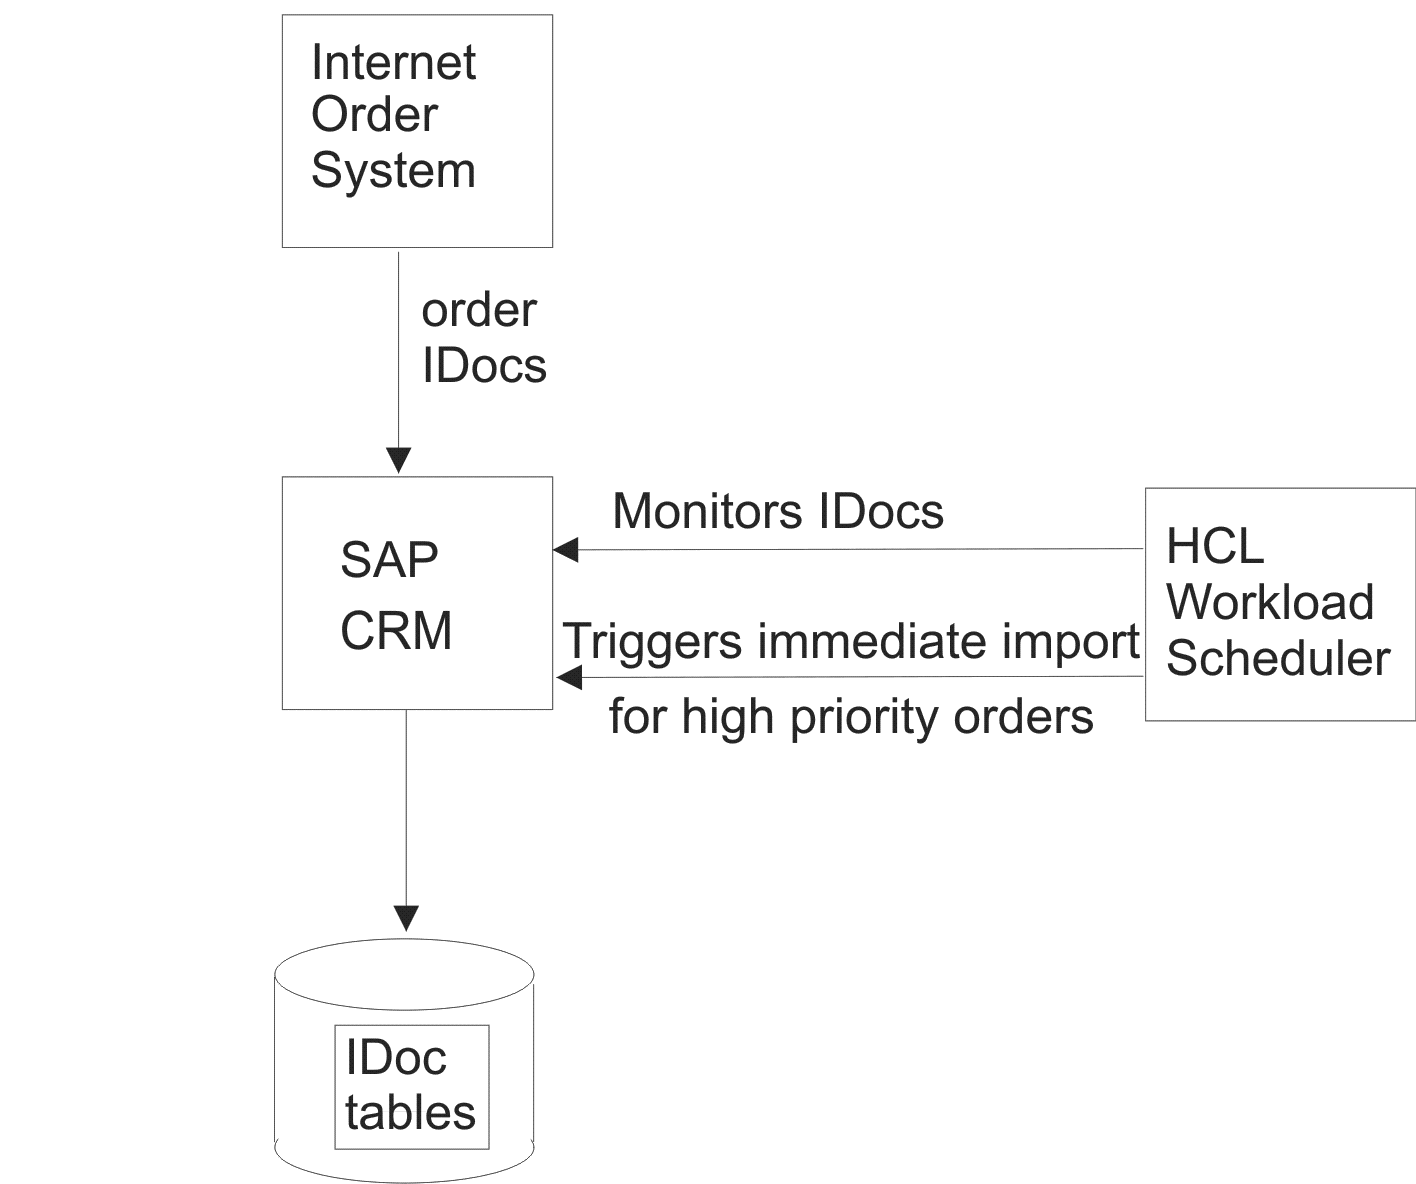 The figure shows order IDocs sent to the CRM system and monitored by HCL Workload Automation, which triggers an immediate import program when high priority orders are detected.